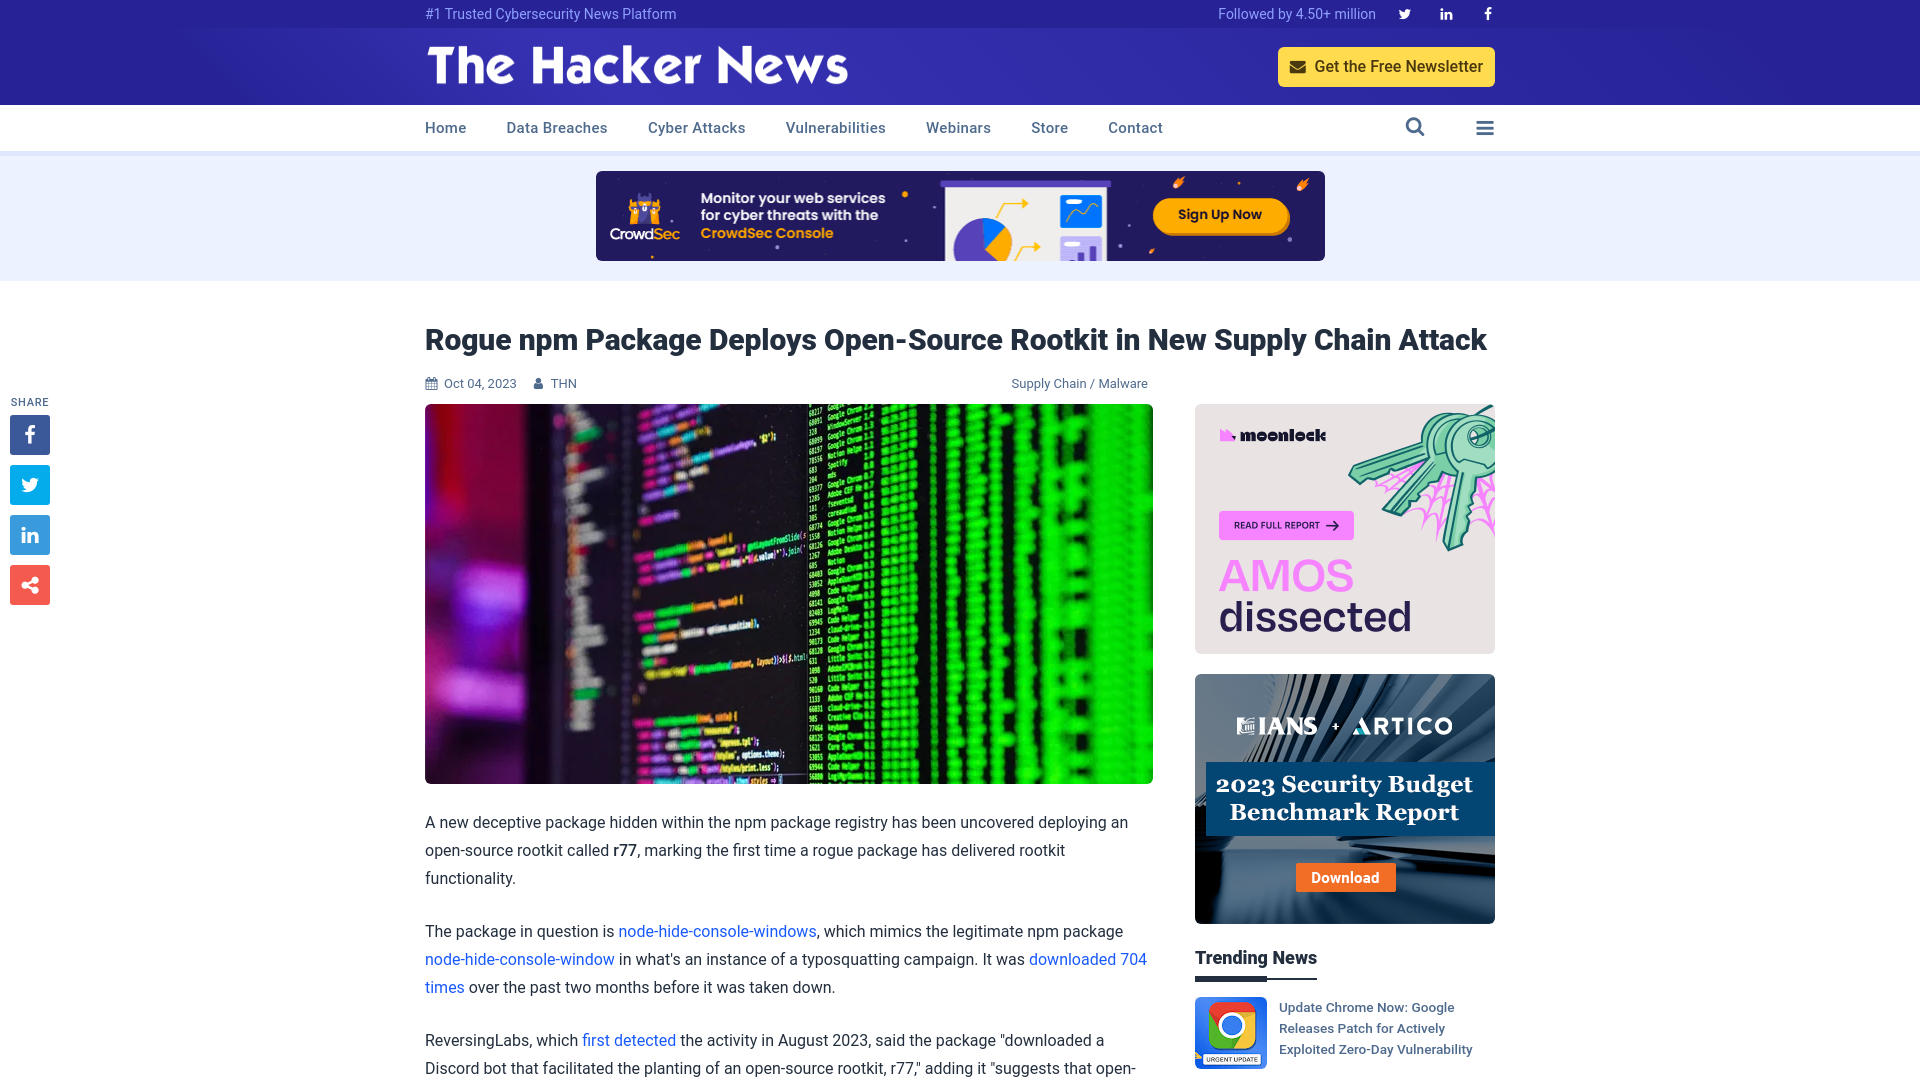 Rogue npm Package Deploys Open-Source Rootkit in New Supply Chain Attack